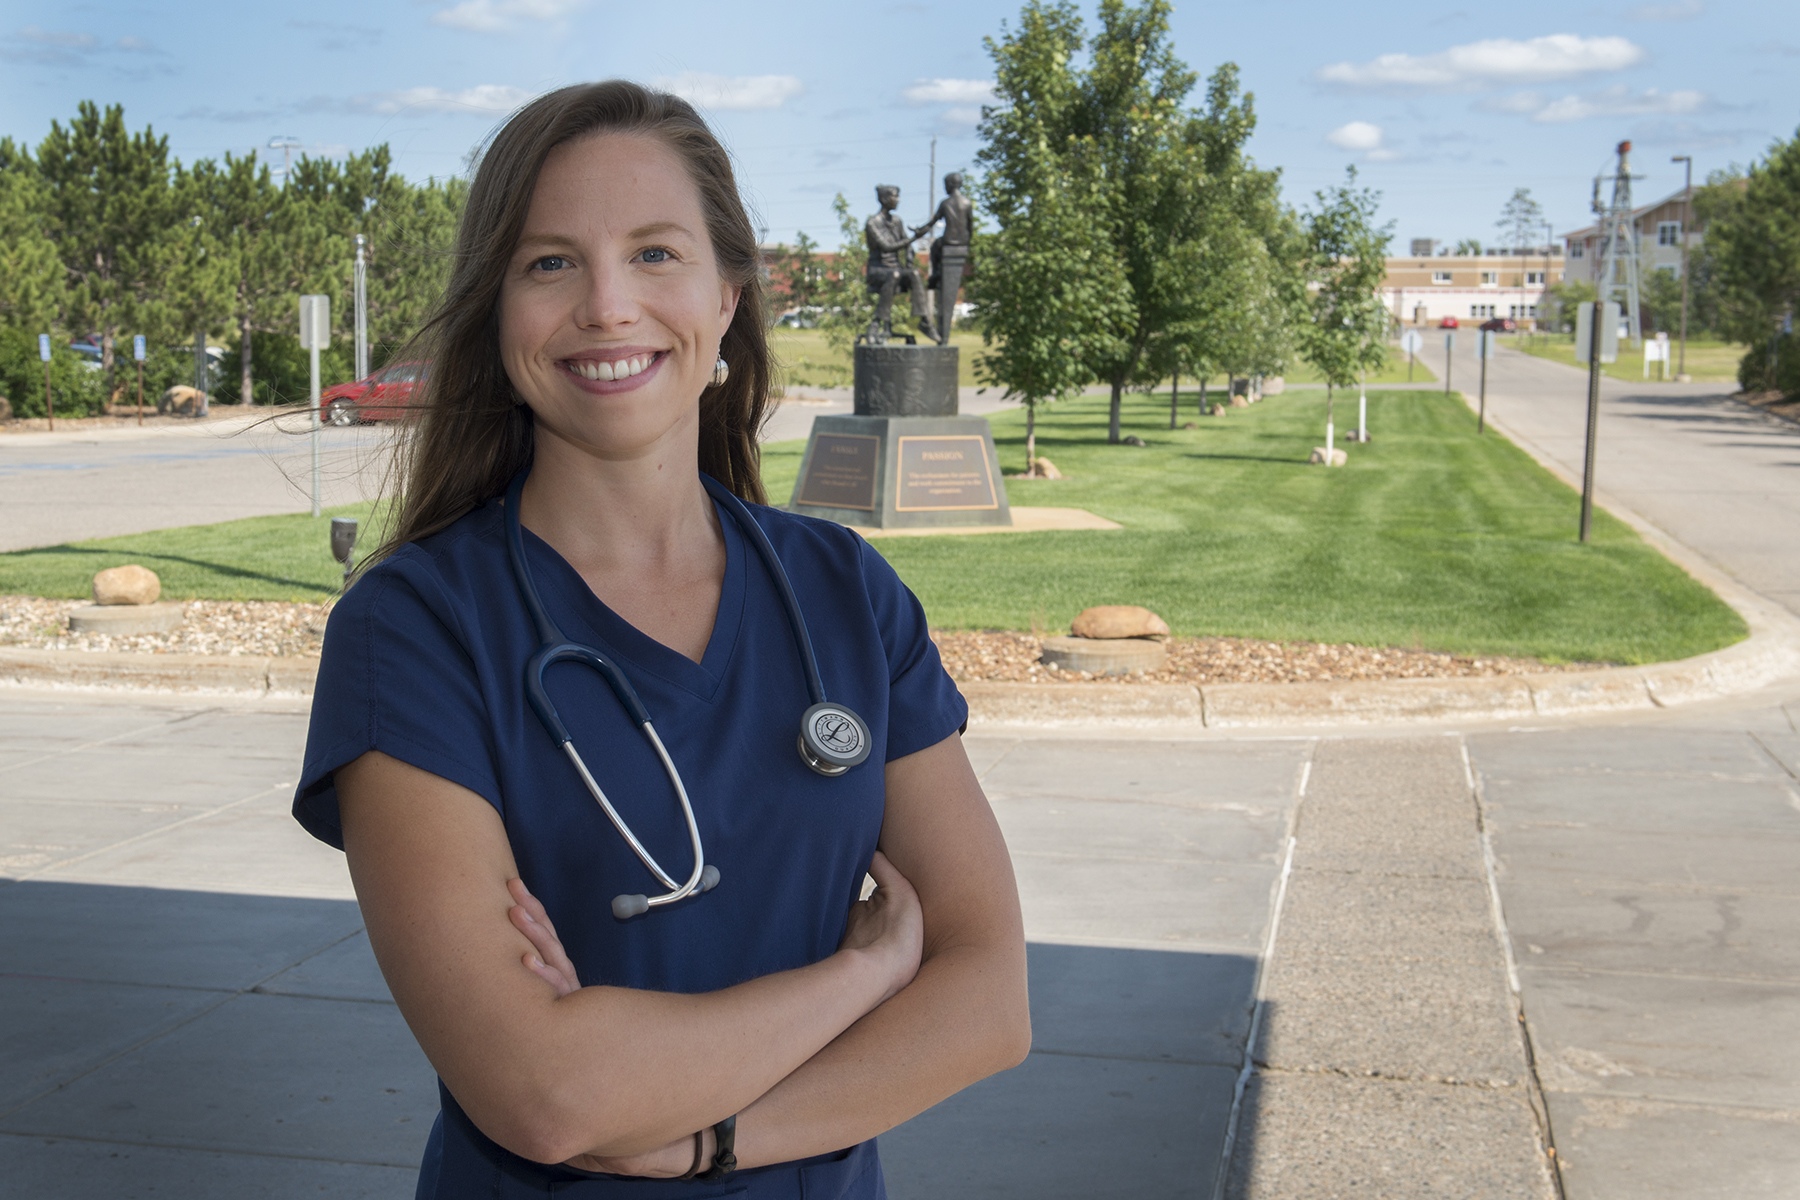 Skiing Accident Leads Katie Houg to NTC and a Future in Health Care